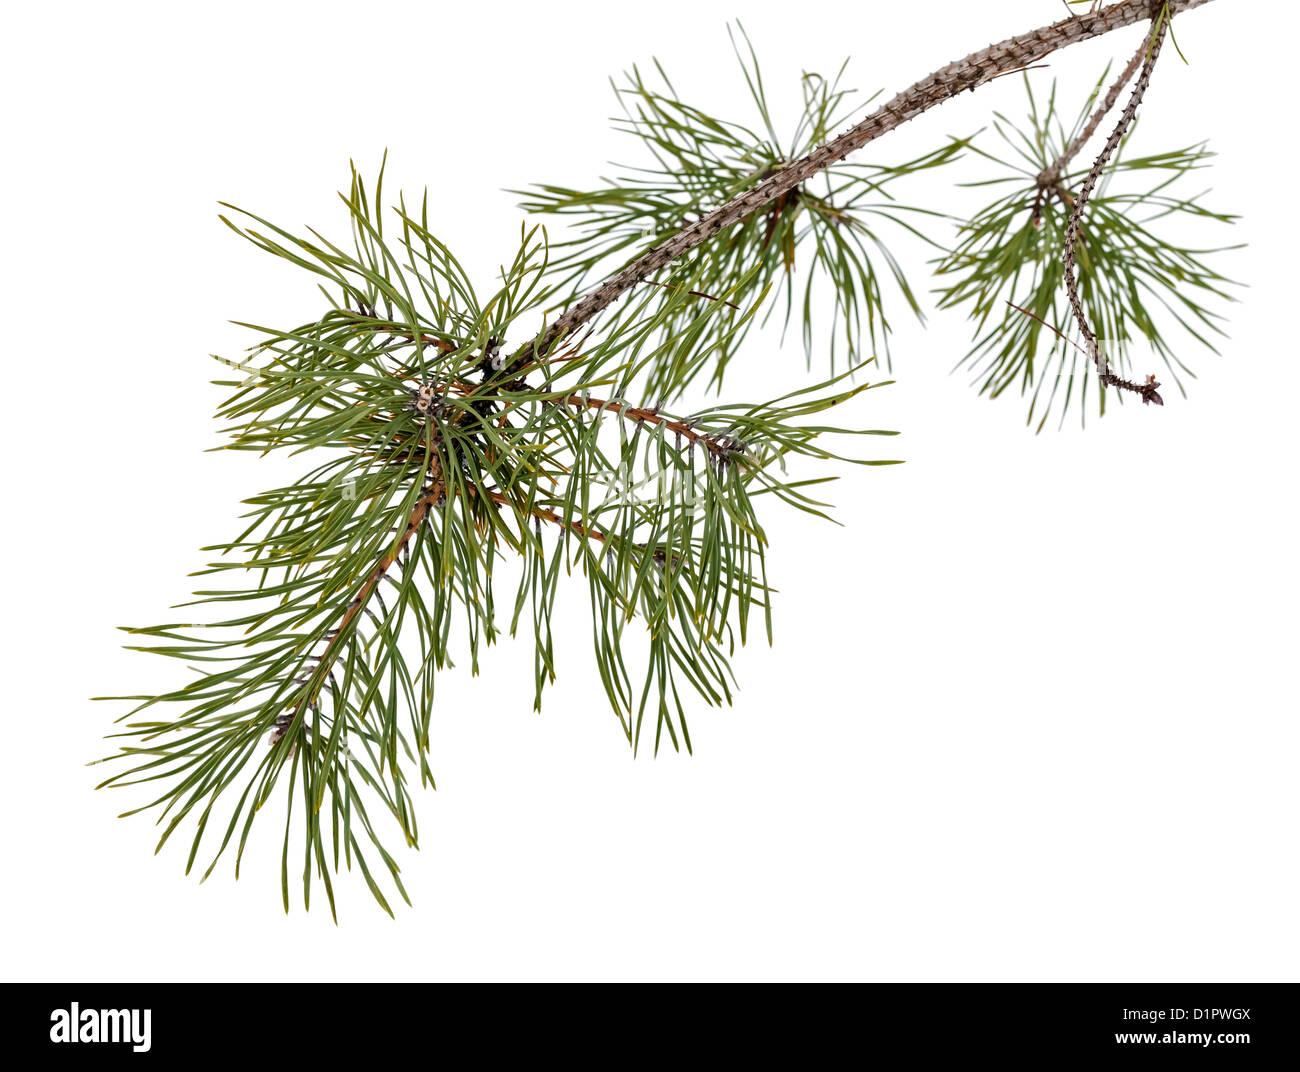 Pine Tree branch isolated on white Banque D'Images